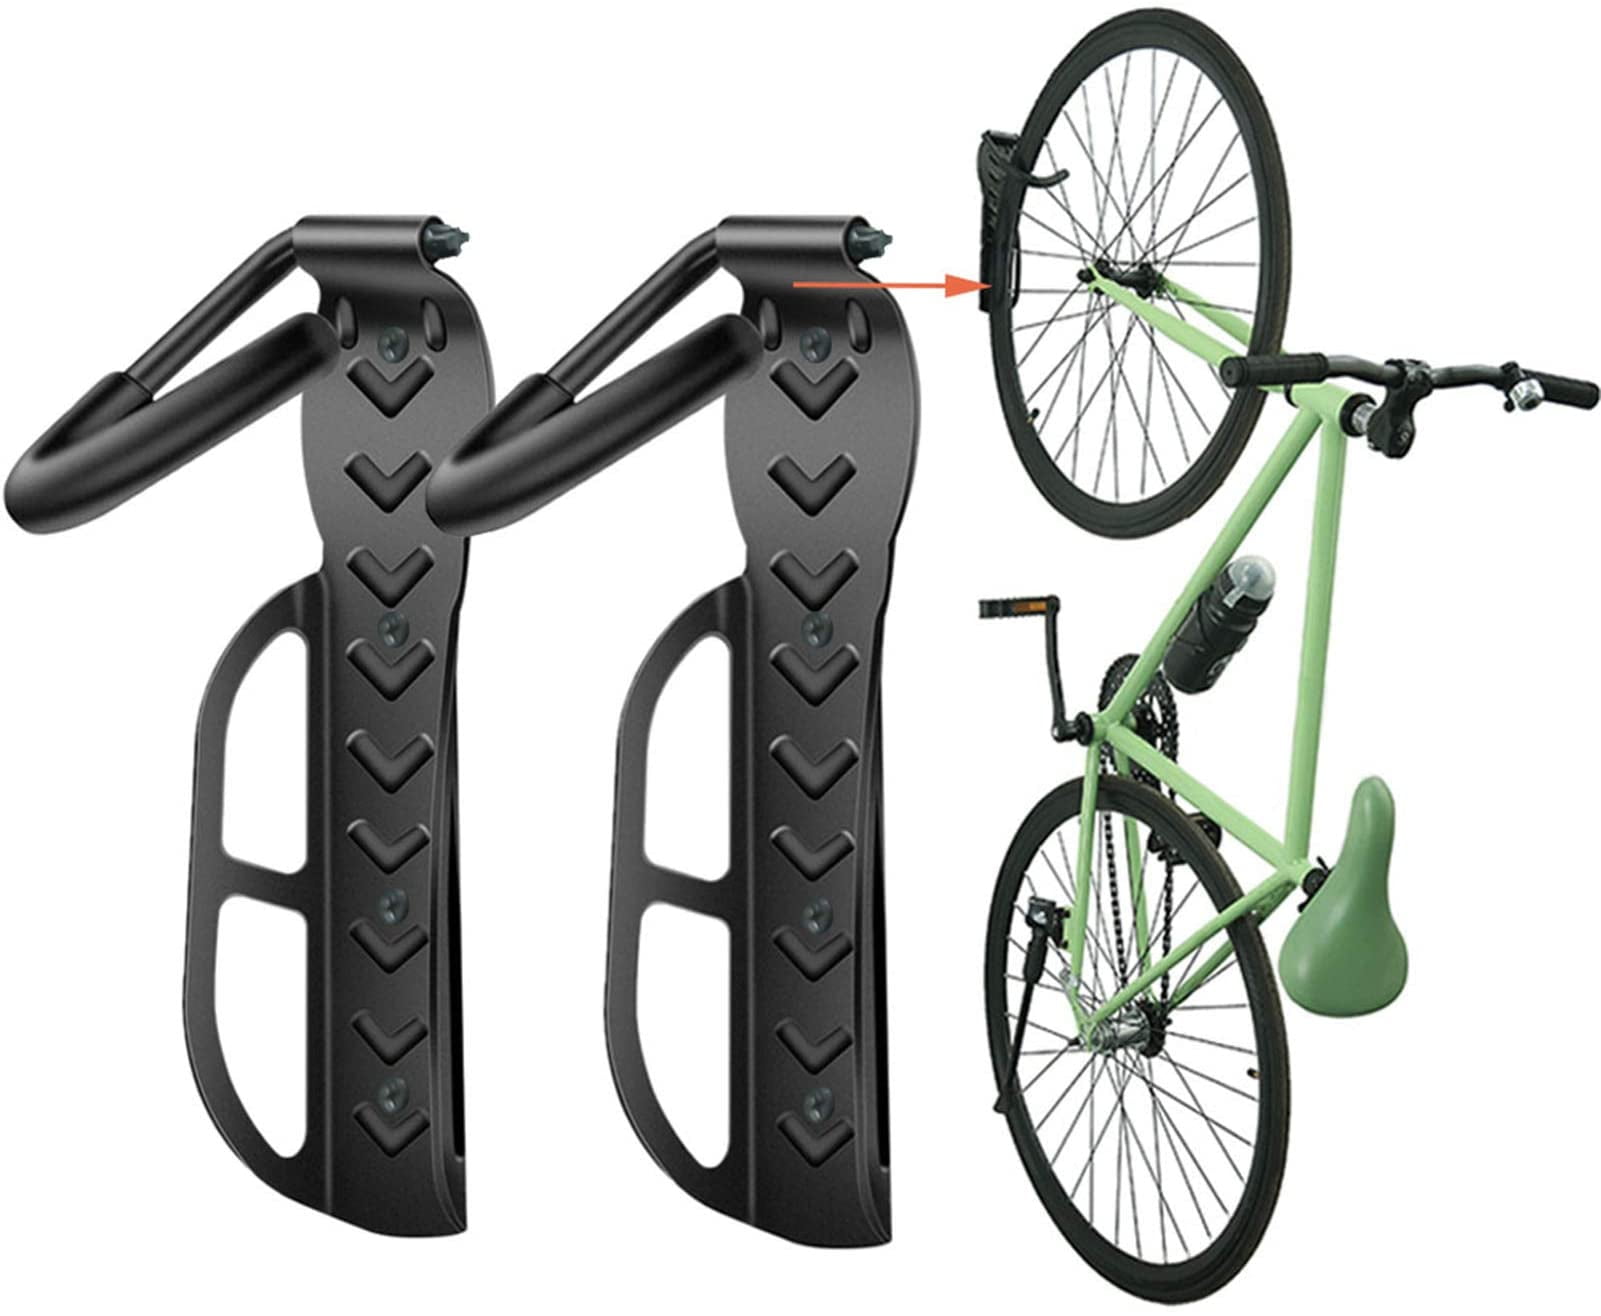 Details about   Bike Bicycle Cycling Storage Wall Mounted Mount Hook Rack Holder Hanger Stand US 